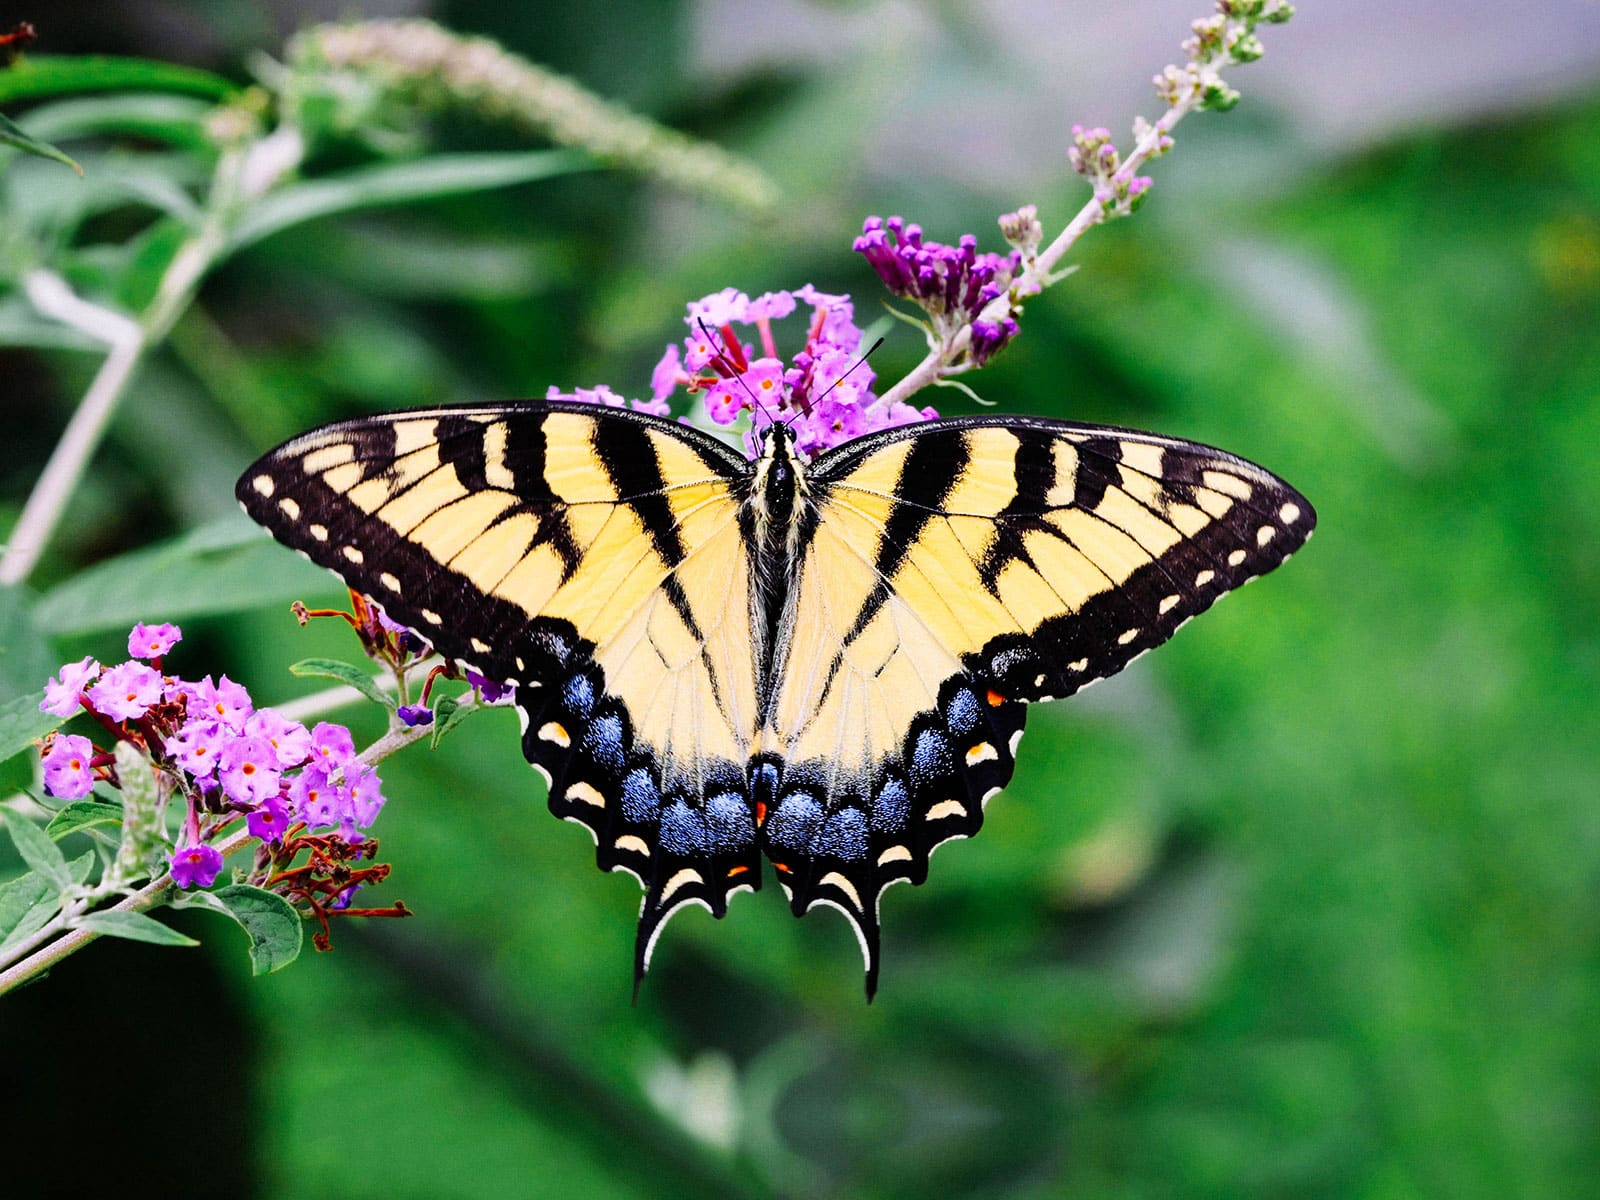 Eastern tiger swallowtail feeding on tiny pink flowers